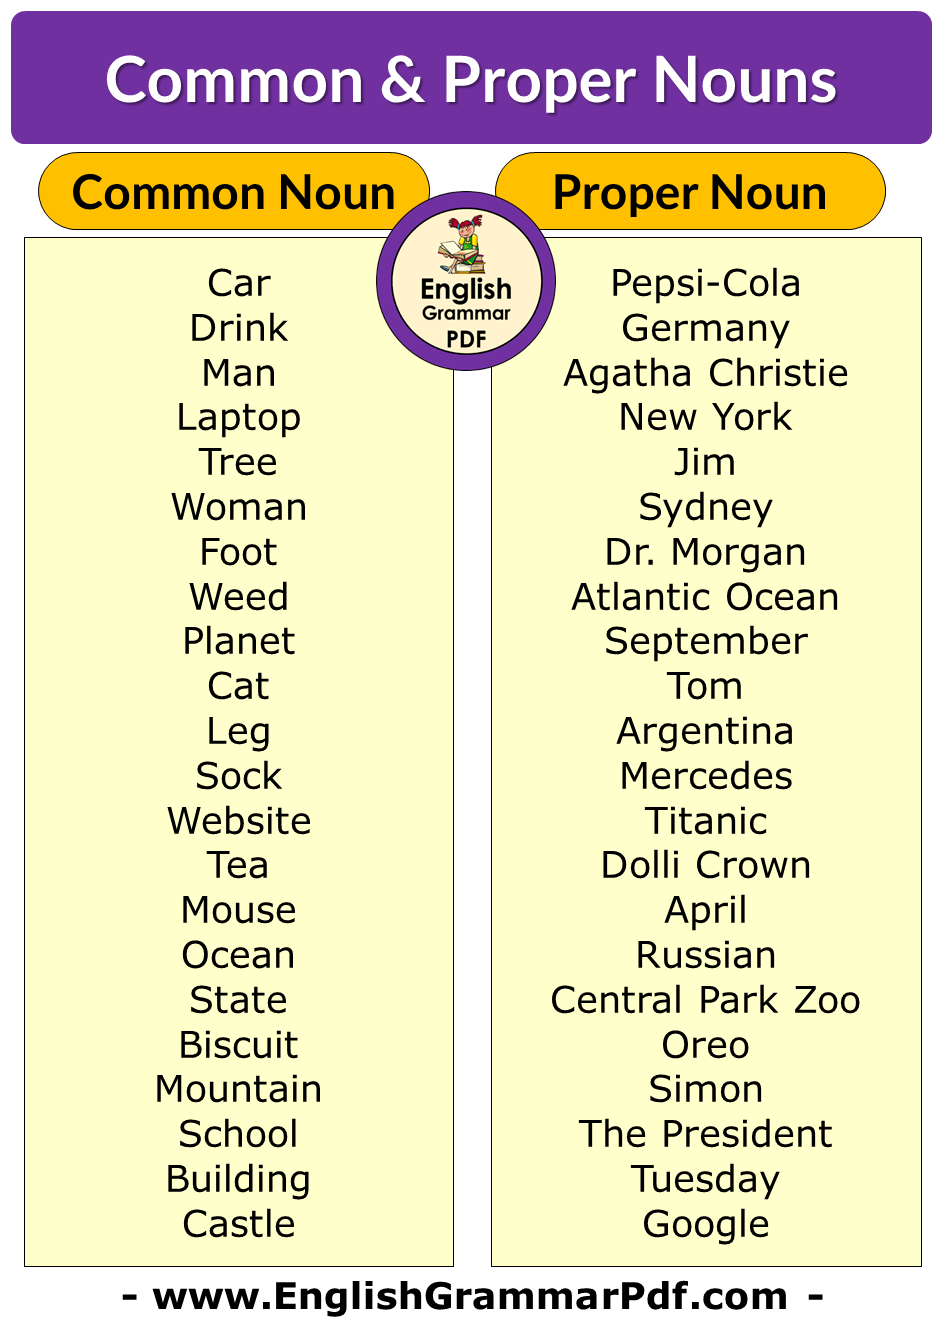 Common Nouns and Proper Nouns Examples